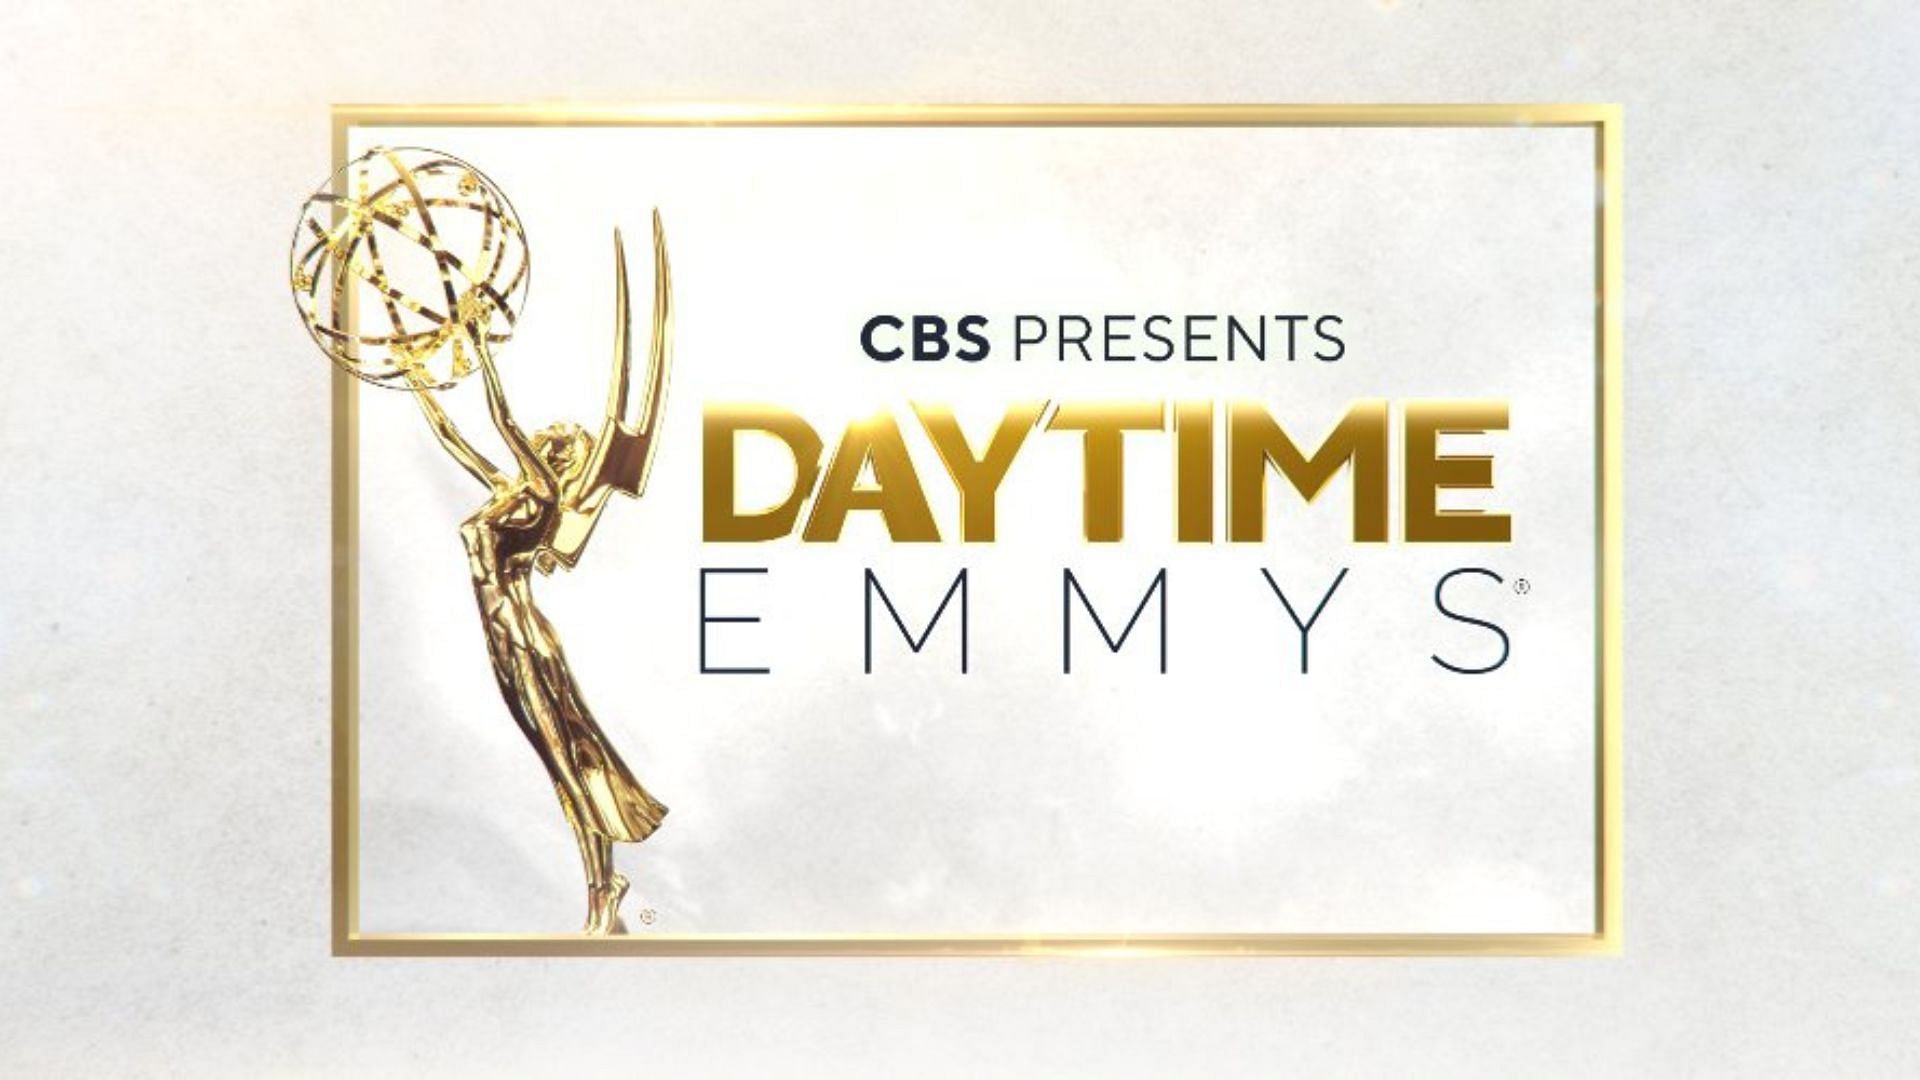 CBS is scheduled to live broadcast the 2022 annual Daytime Emmy Awards this Friday, June 24, 2022 (Image via @DaytimeEmmys/Twitter)